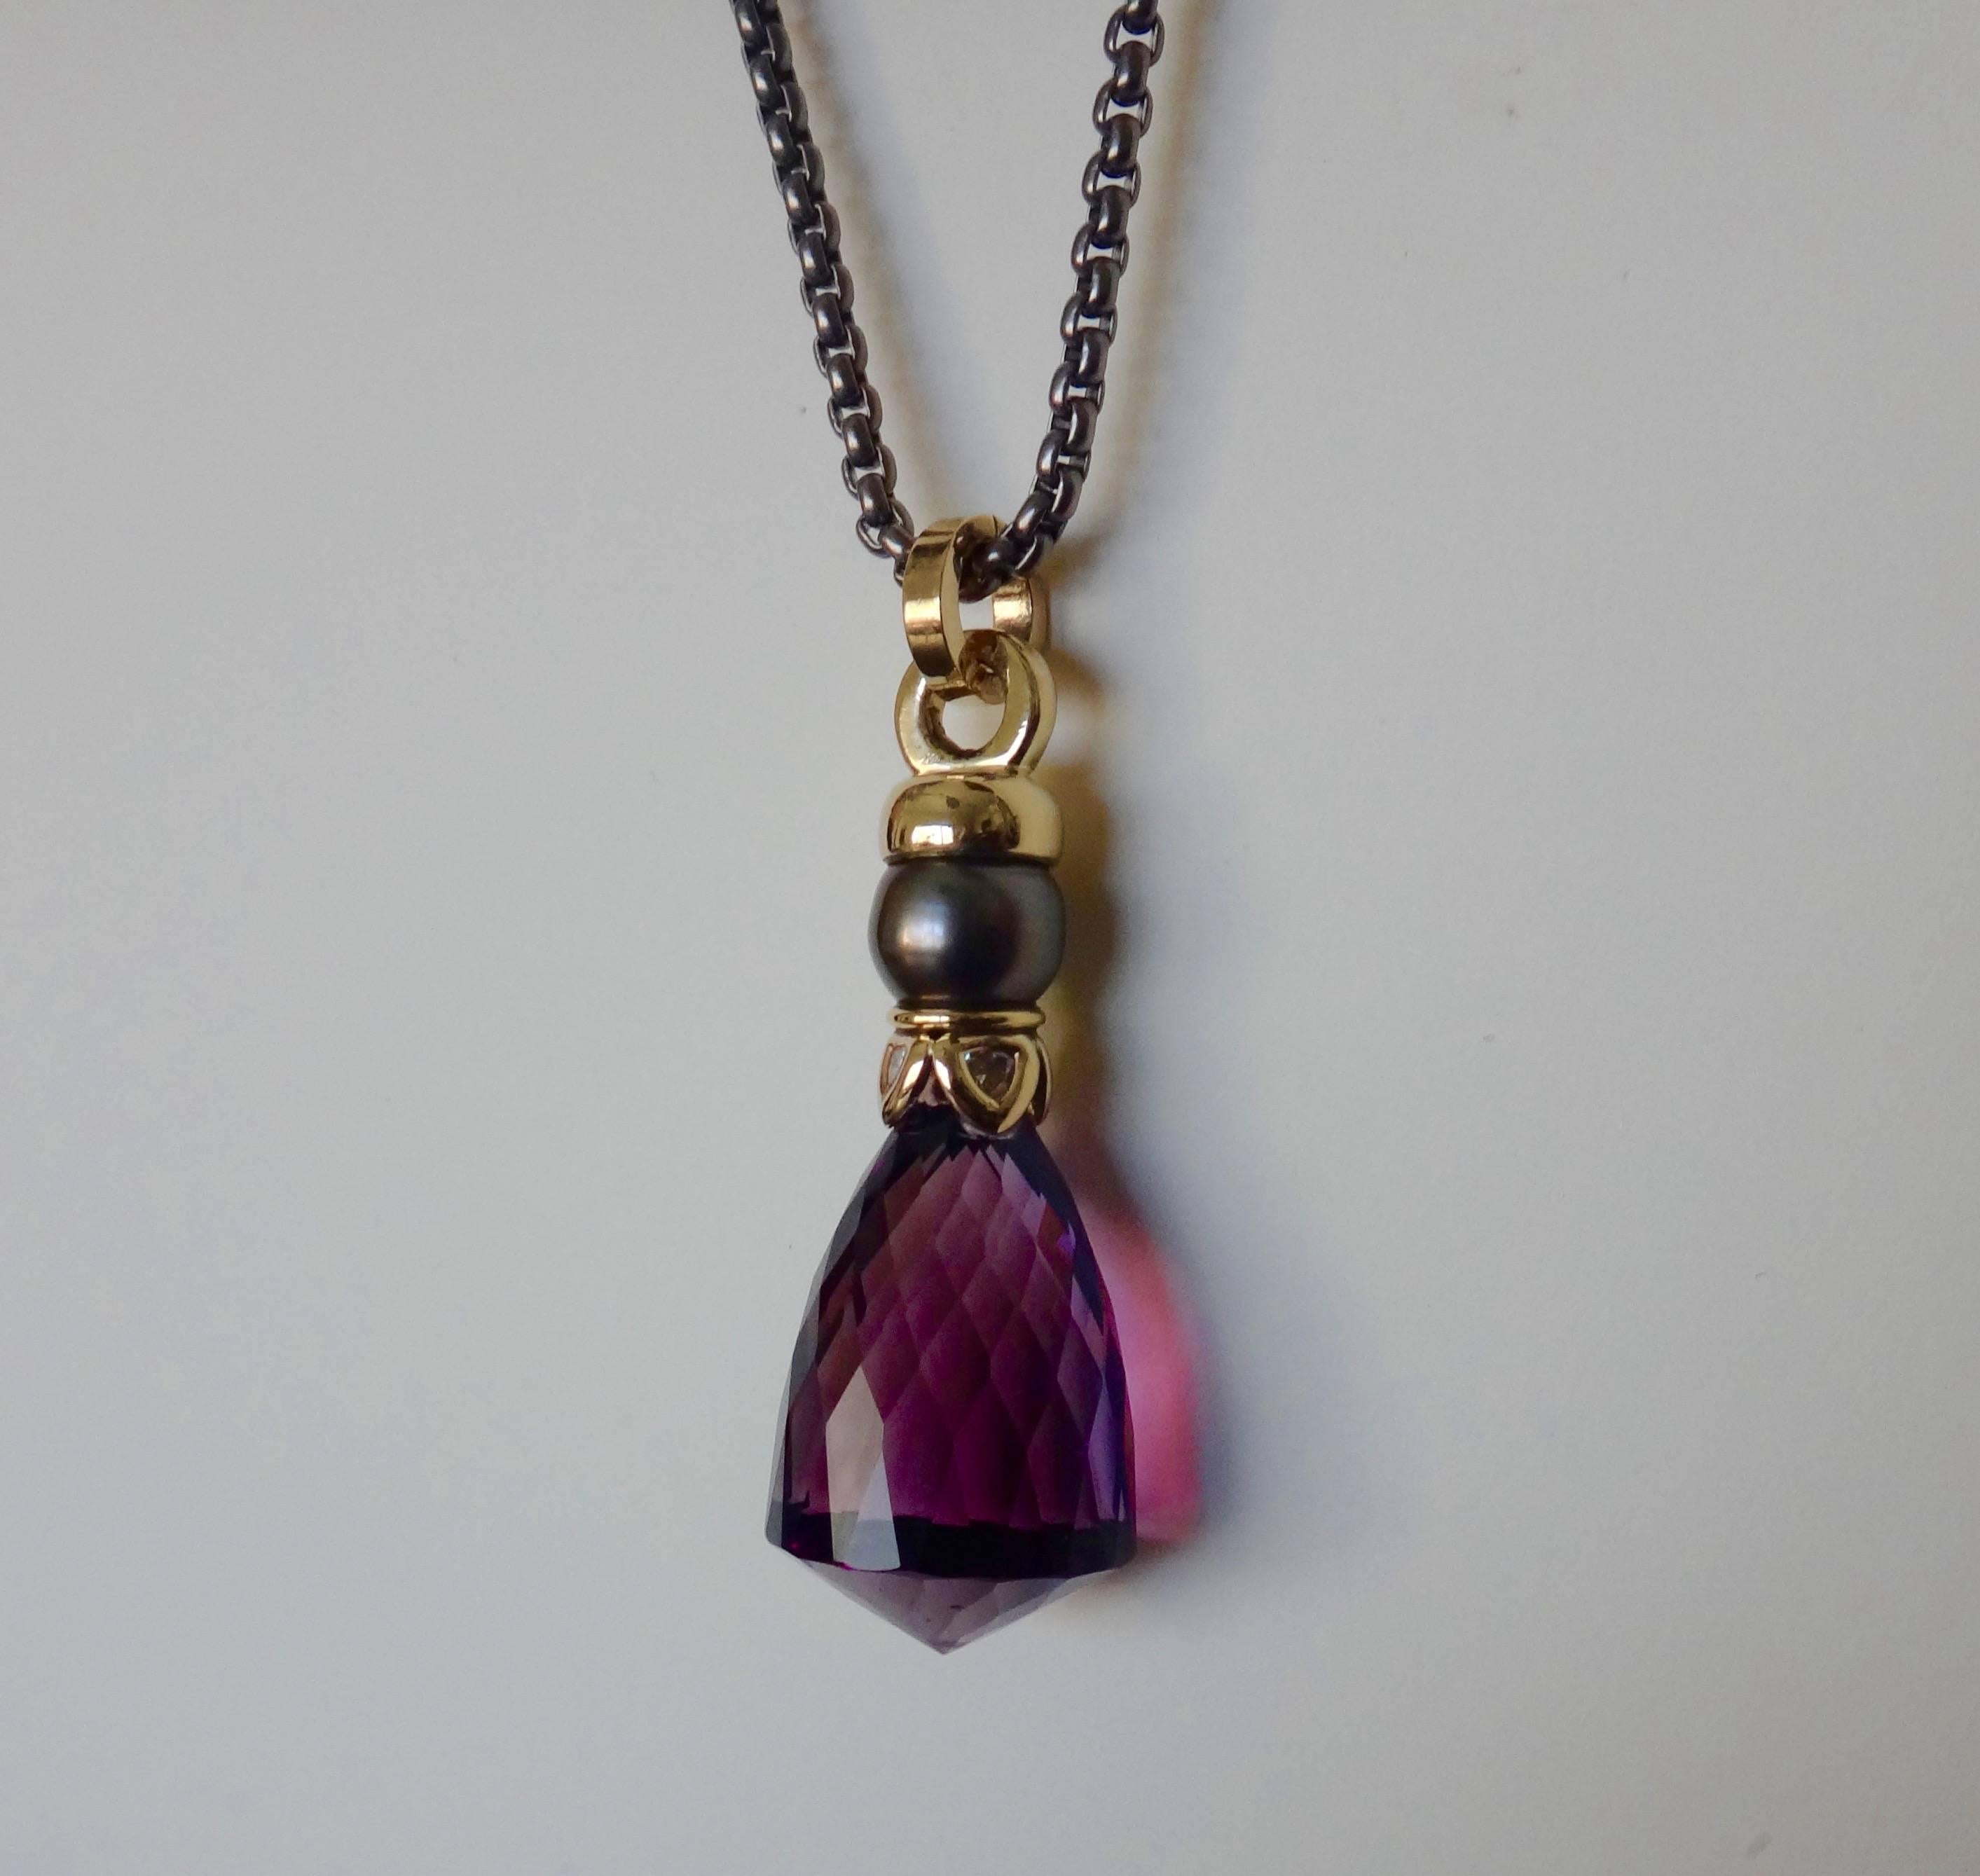 A dramatically shaped and faceted briolette is featured in this unique pendant.  Decorating the amethyst is an end cap composed of a black Tahitian pearl and bezel set, trillion shaped white diamonds.  The pendant hangs from a 30 inch titanium chain